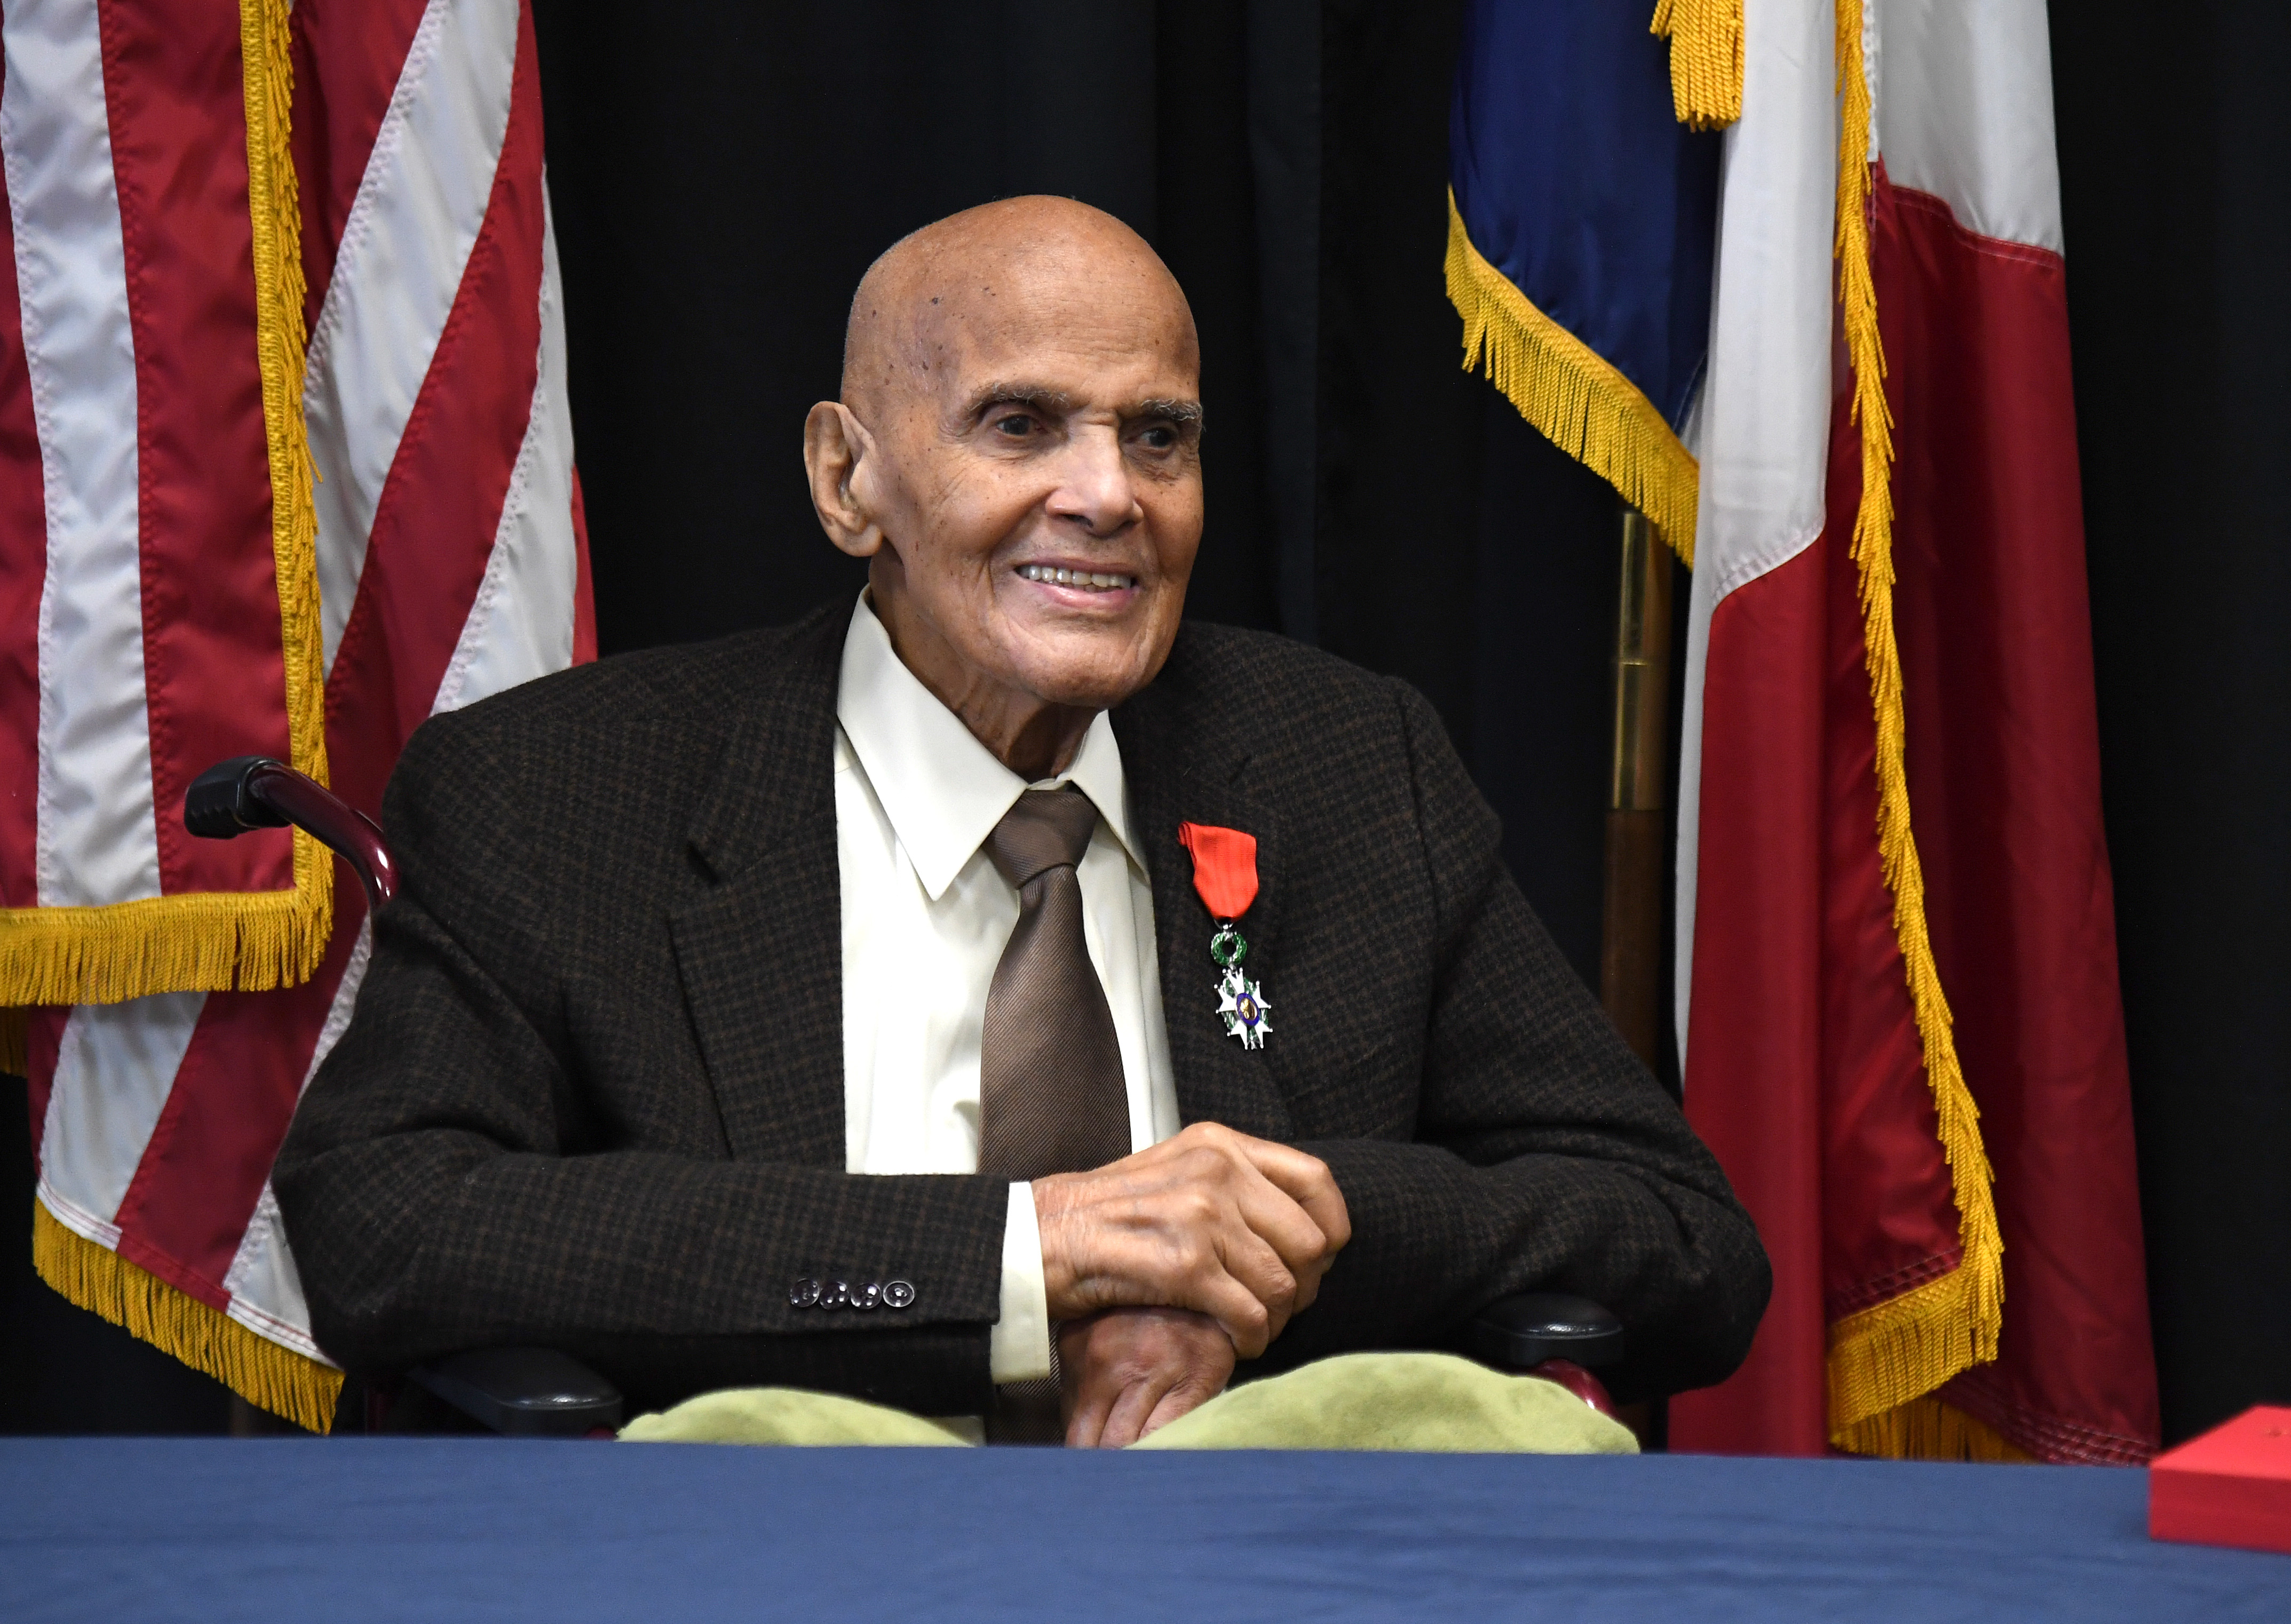 Harry Belafonte receives the National Order of the Legion of Honour, the highest award bestowed by the French government